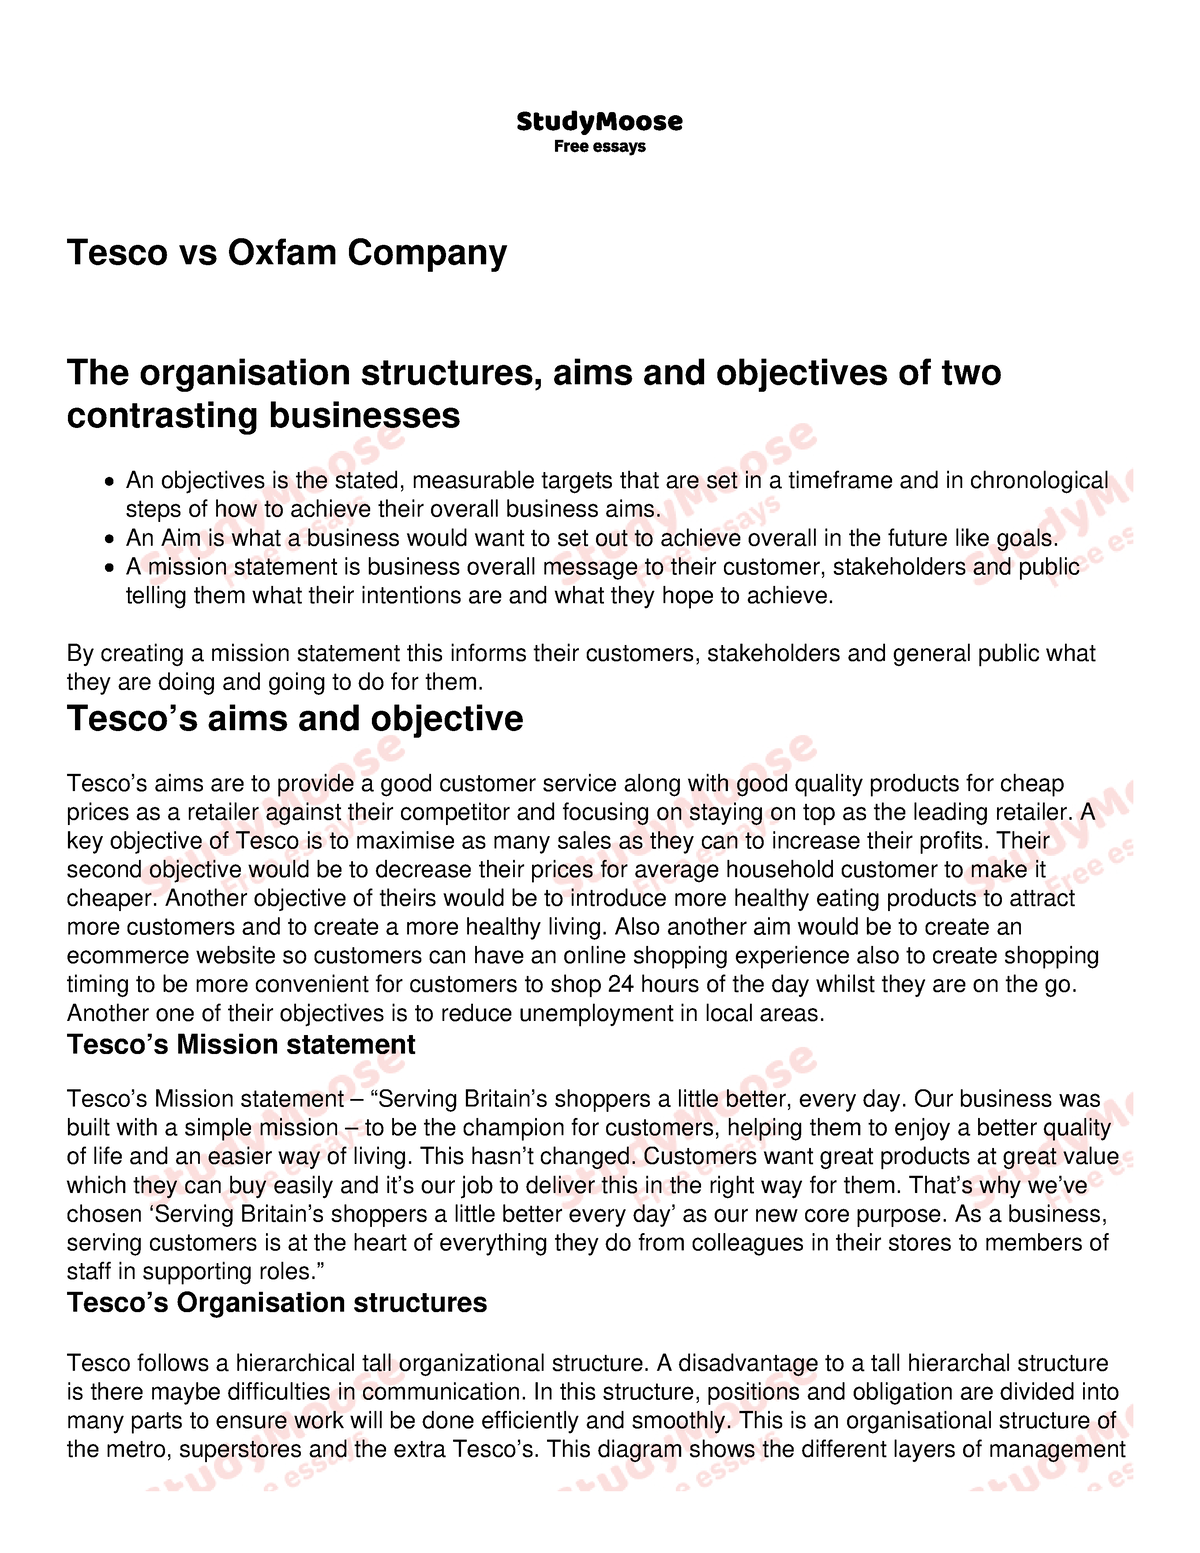 tesco structure